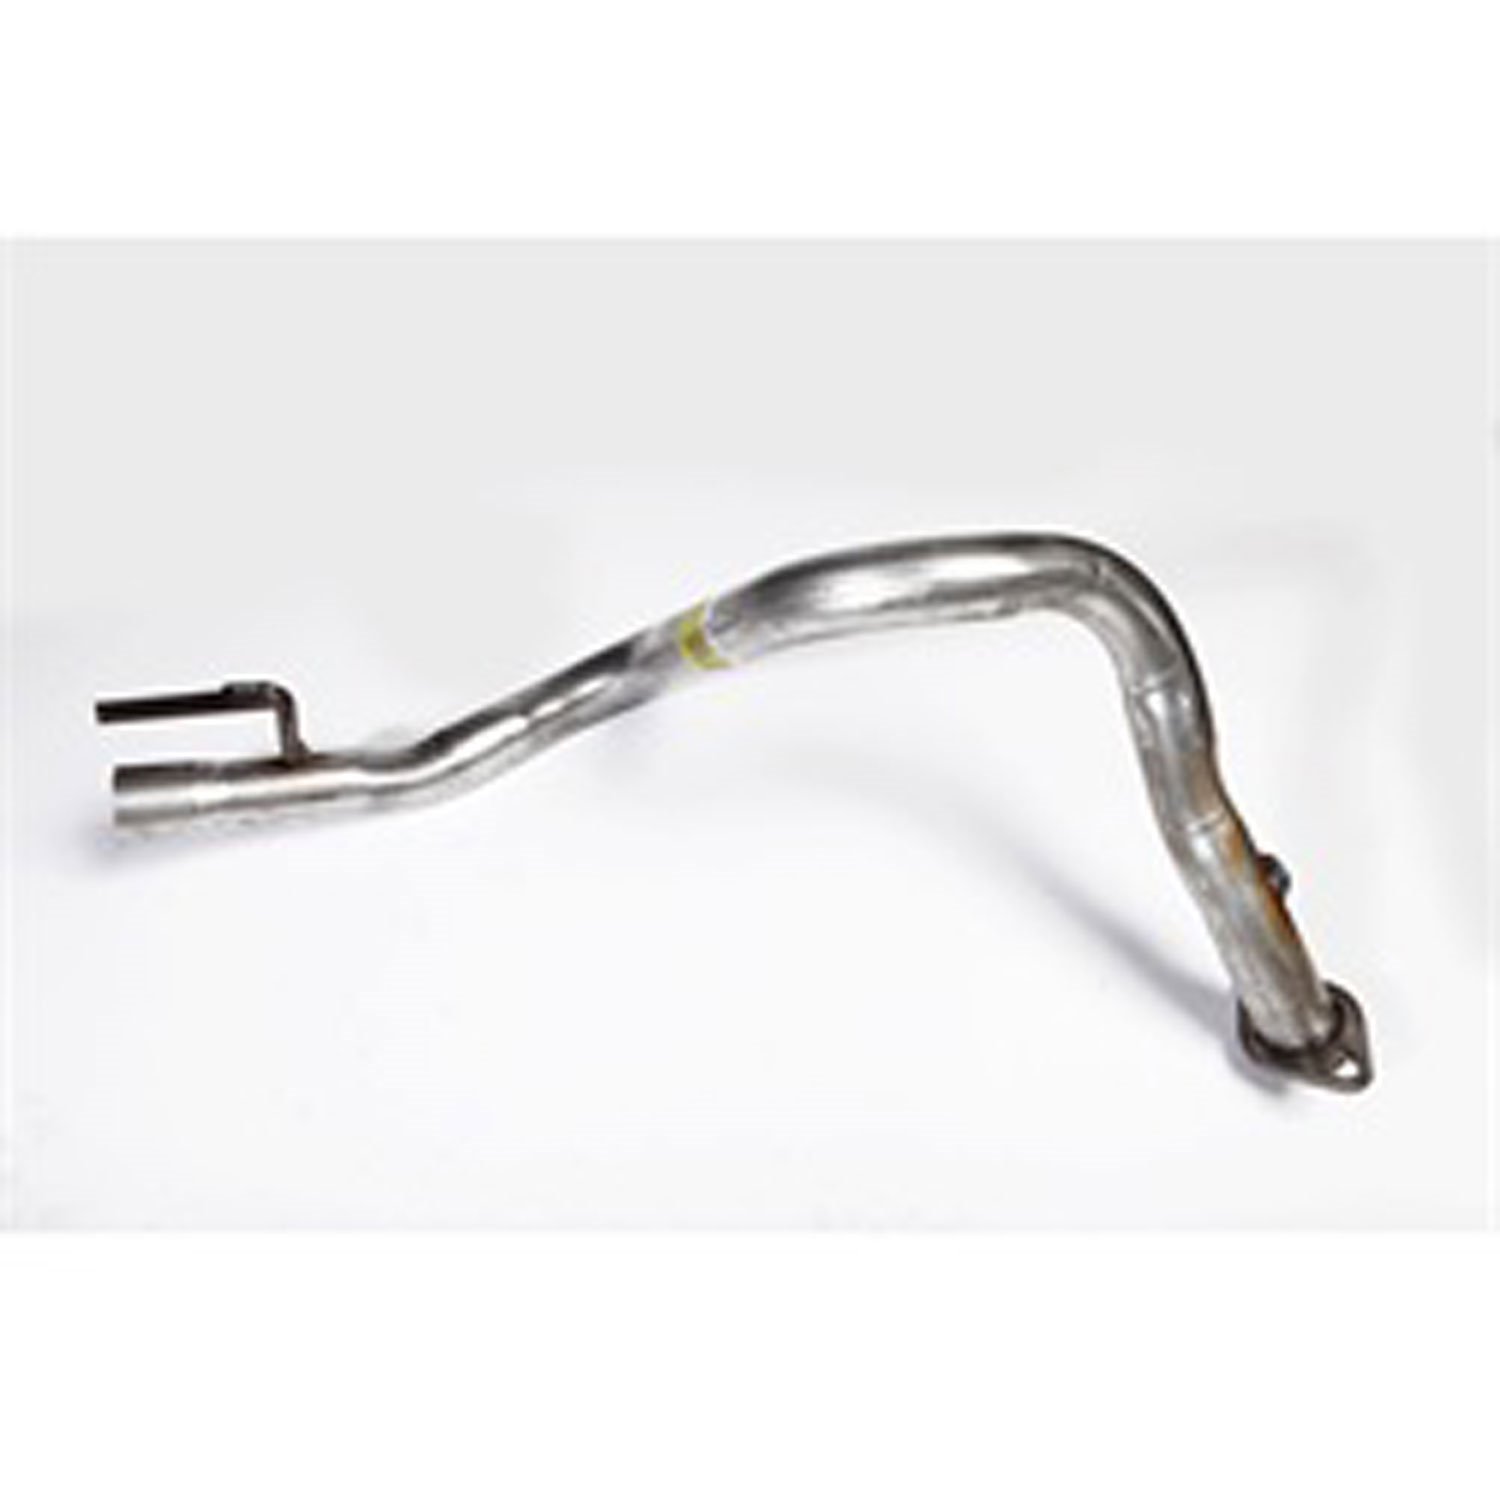 Head Pipe Exhaust 2.5L 1993-1995 Jeep Wrangler YJ By Omix-ADA